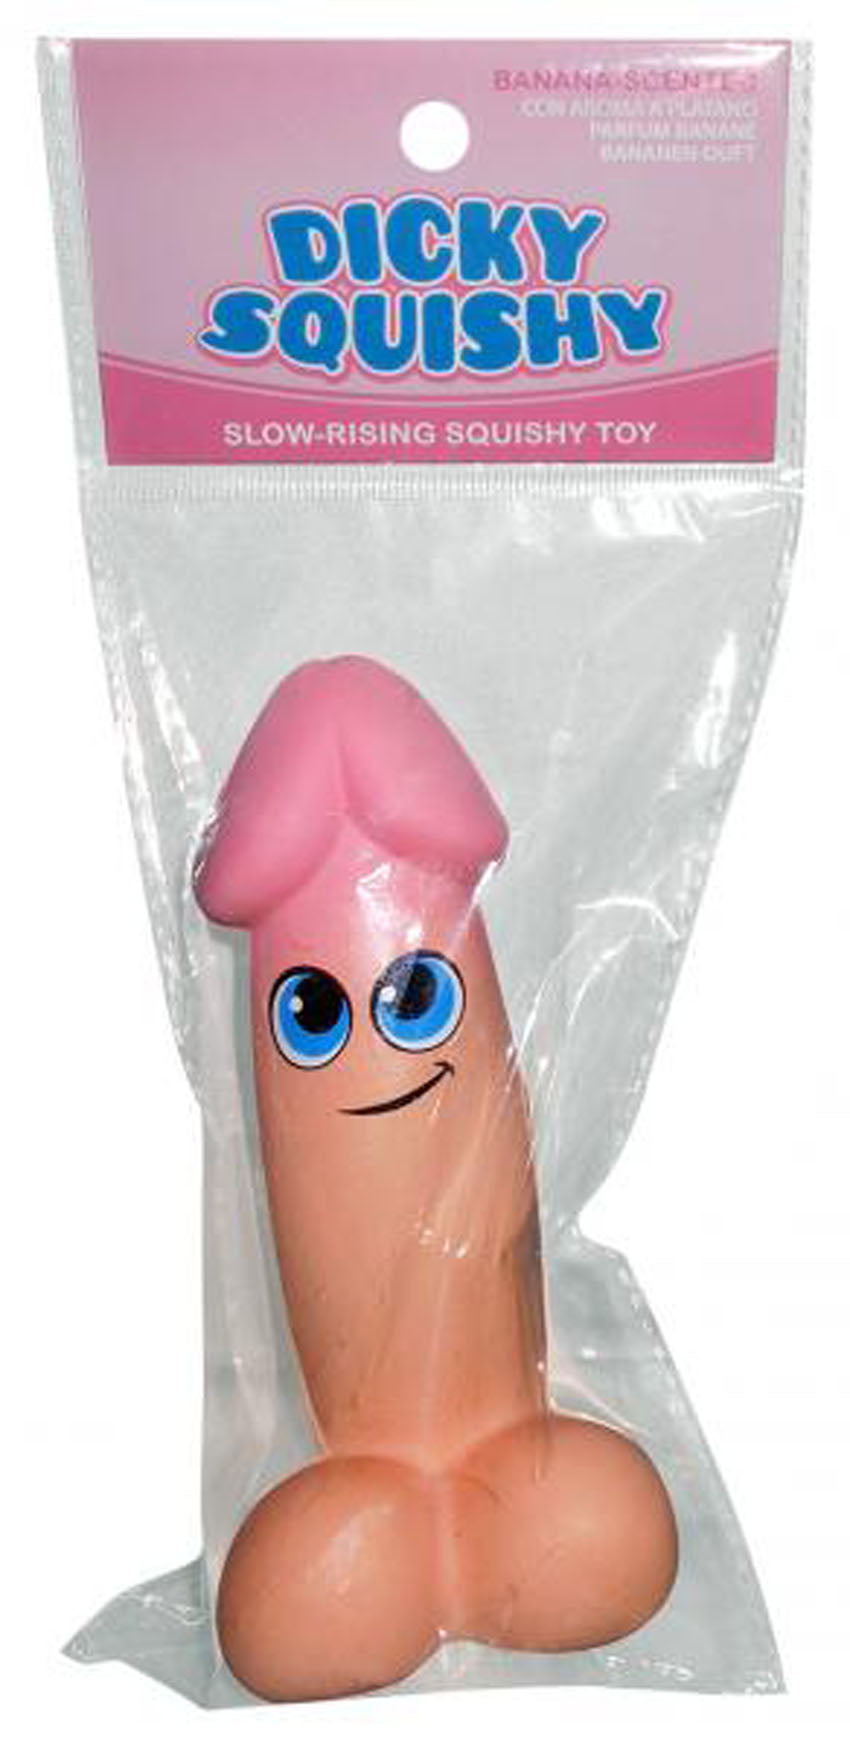 Dick Squishy 5.5" Tall - Banana Scented KG-NV090